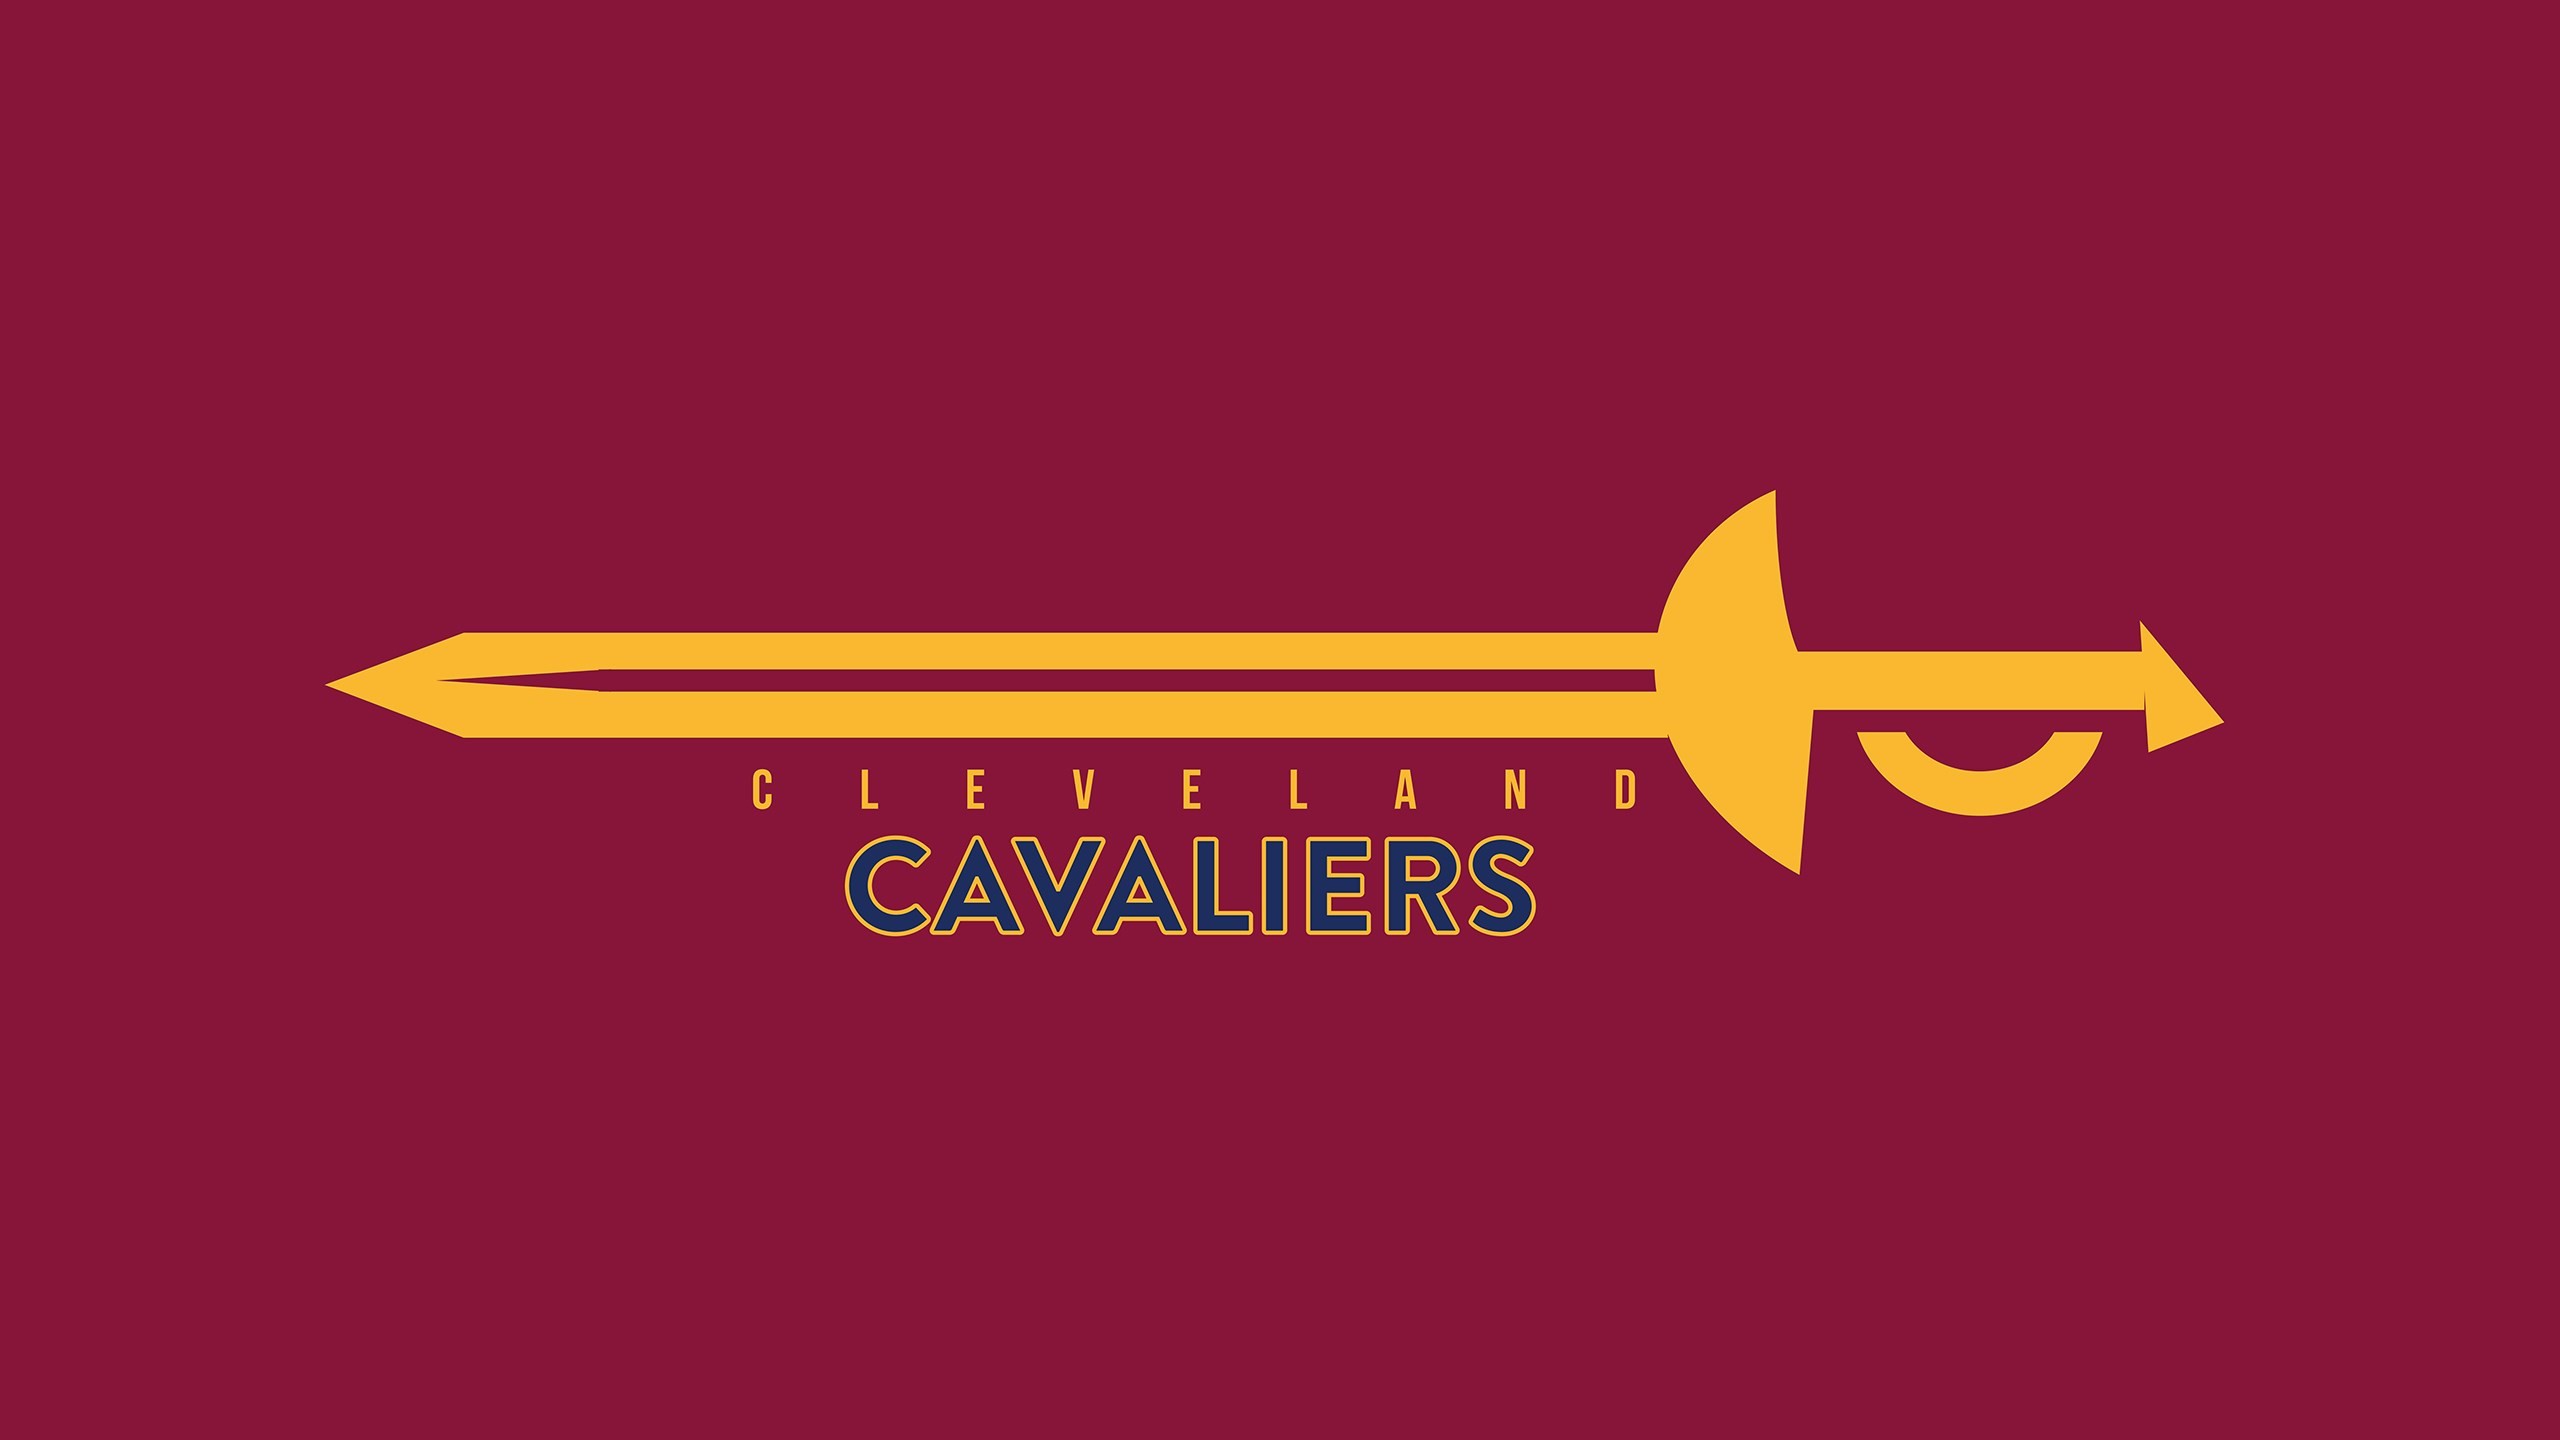 2560x1440 HD Widescreen Wallpapers - cleveland cavaliers pic, 116 kB - Albany  Robertson